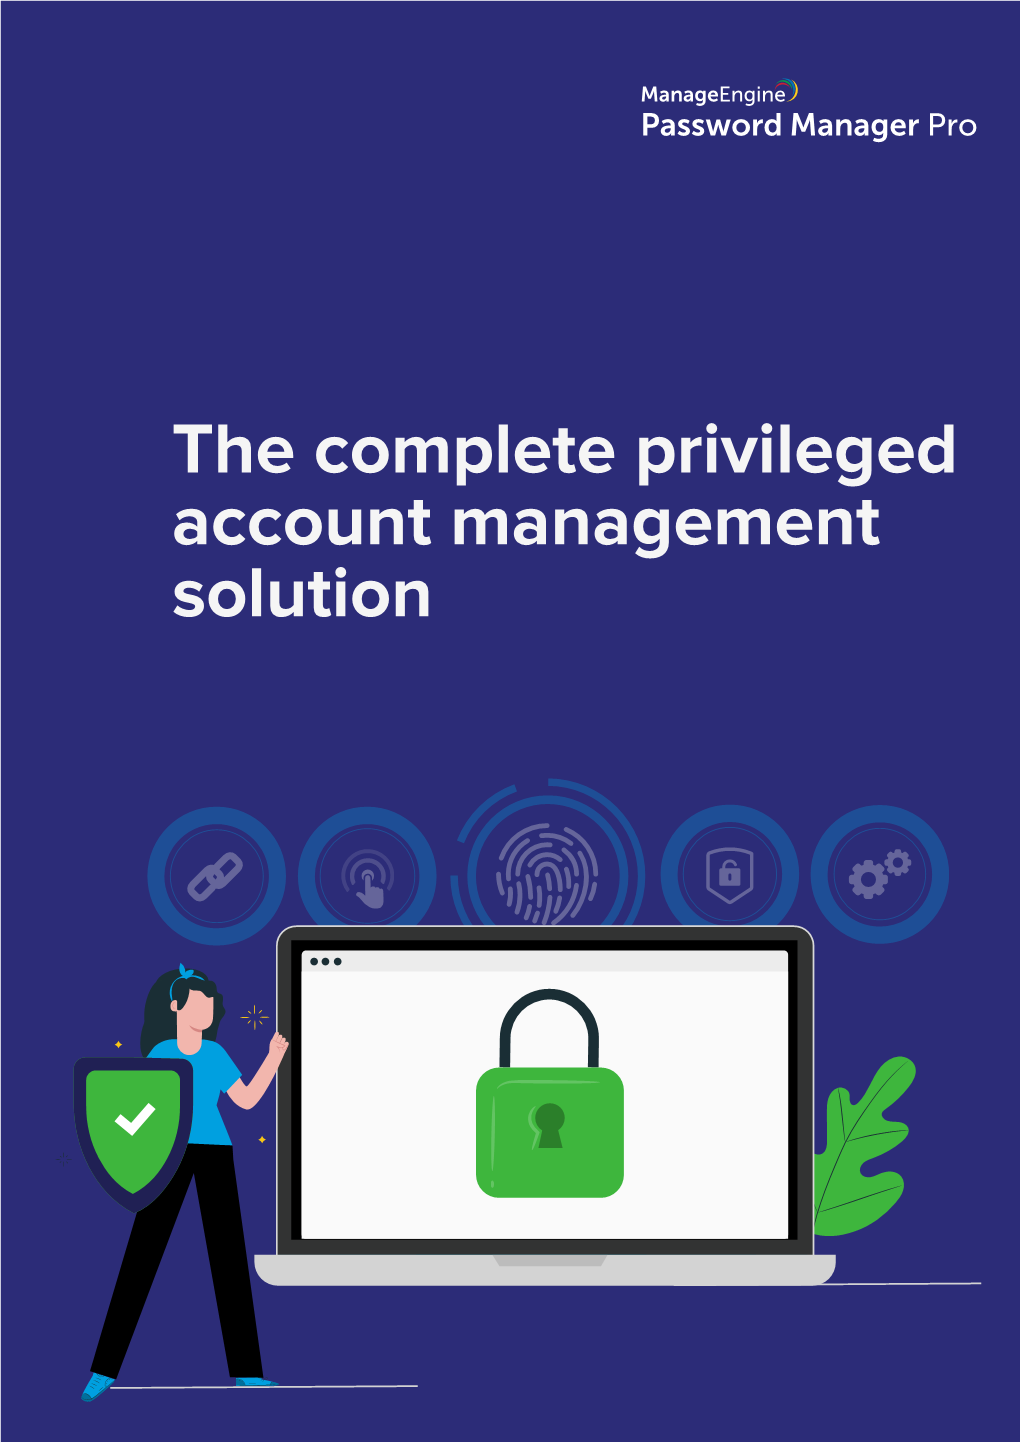 Password Manager Pro Solution Brief